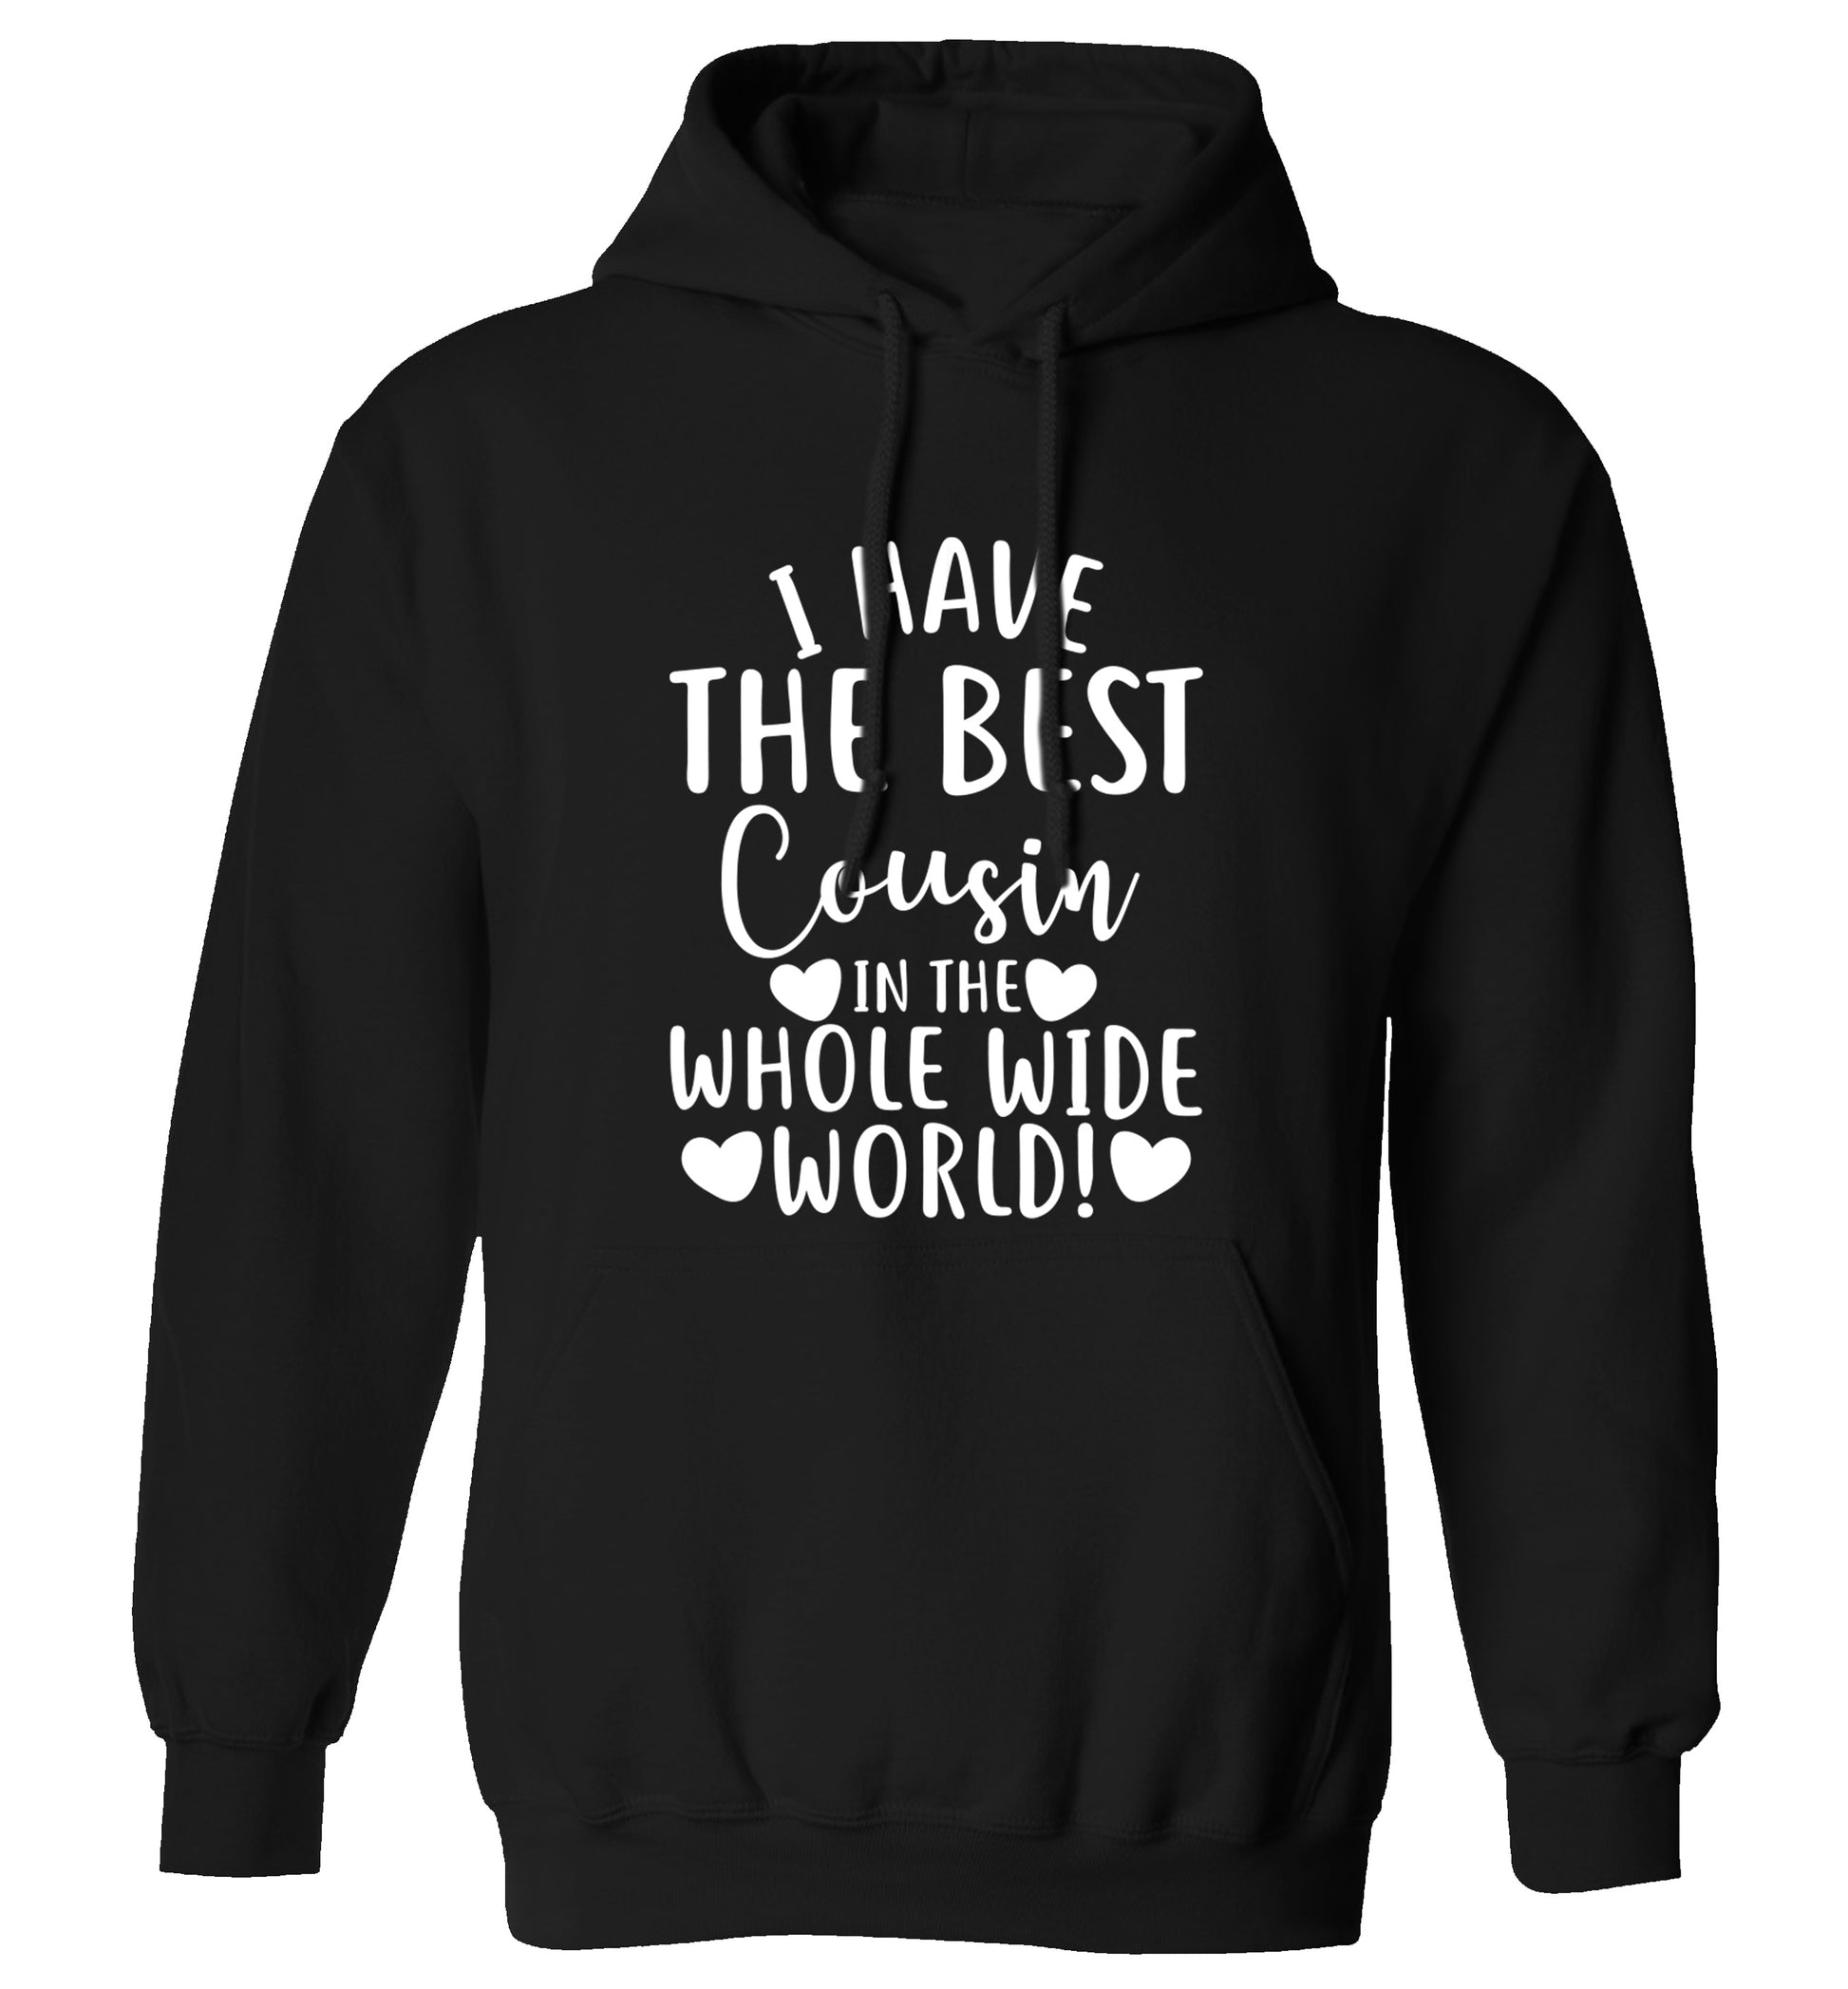 I have the best cousin in the whole wide world! adults unisex black hoodie 2XL